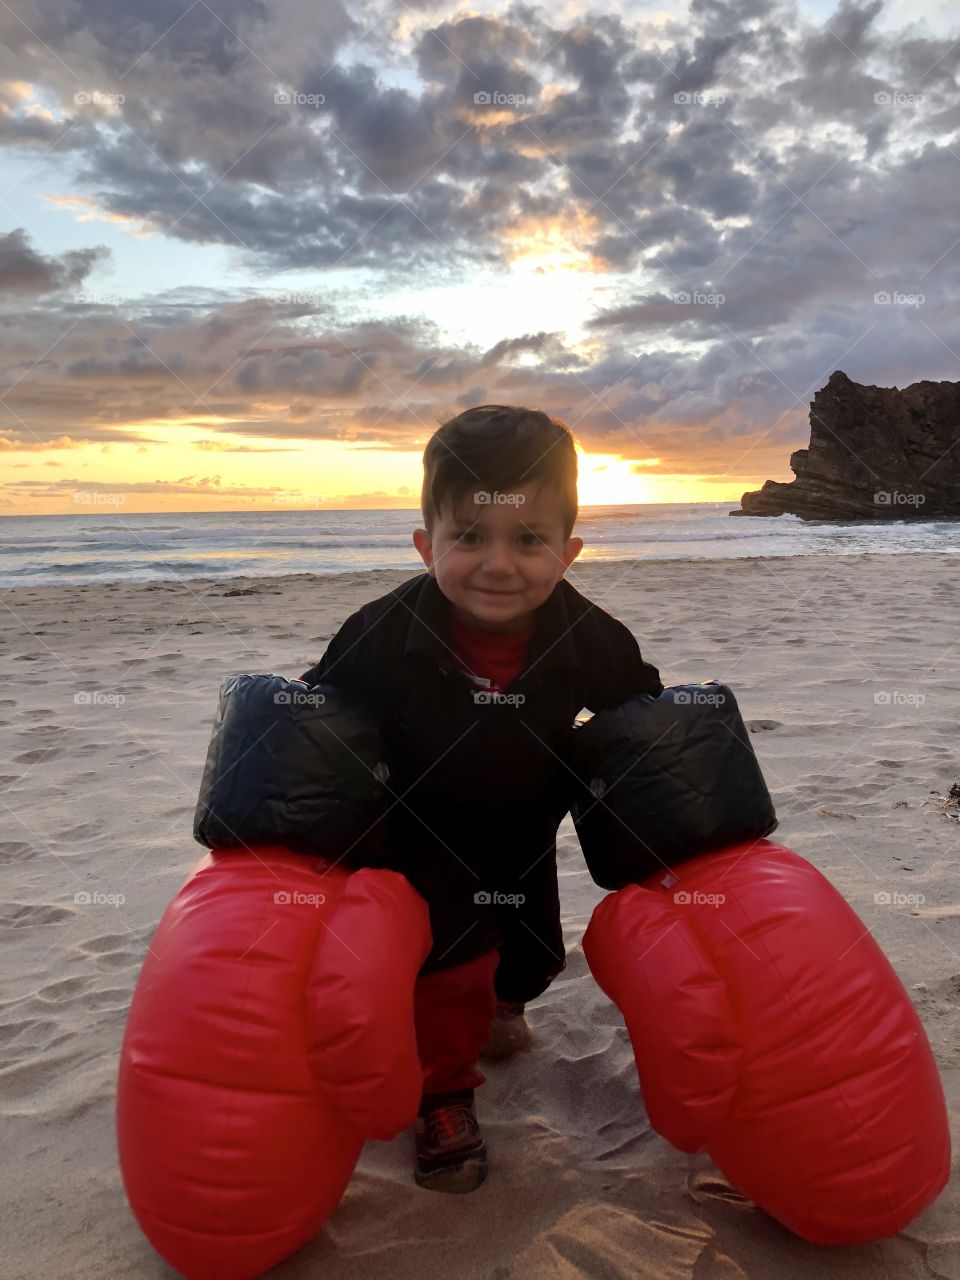 Boxing on the beach 